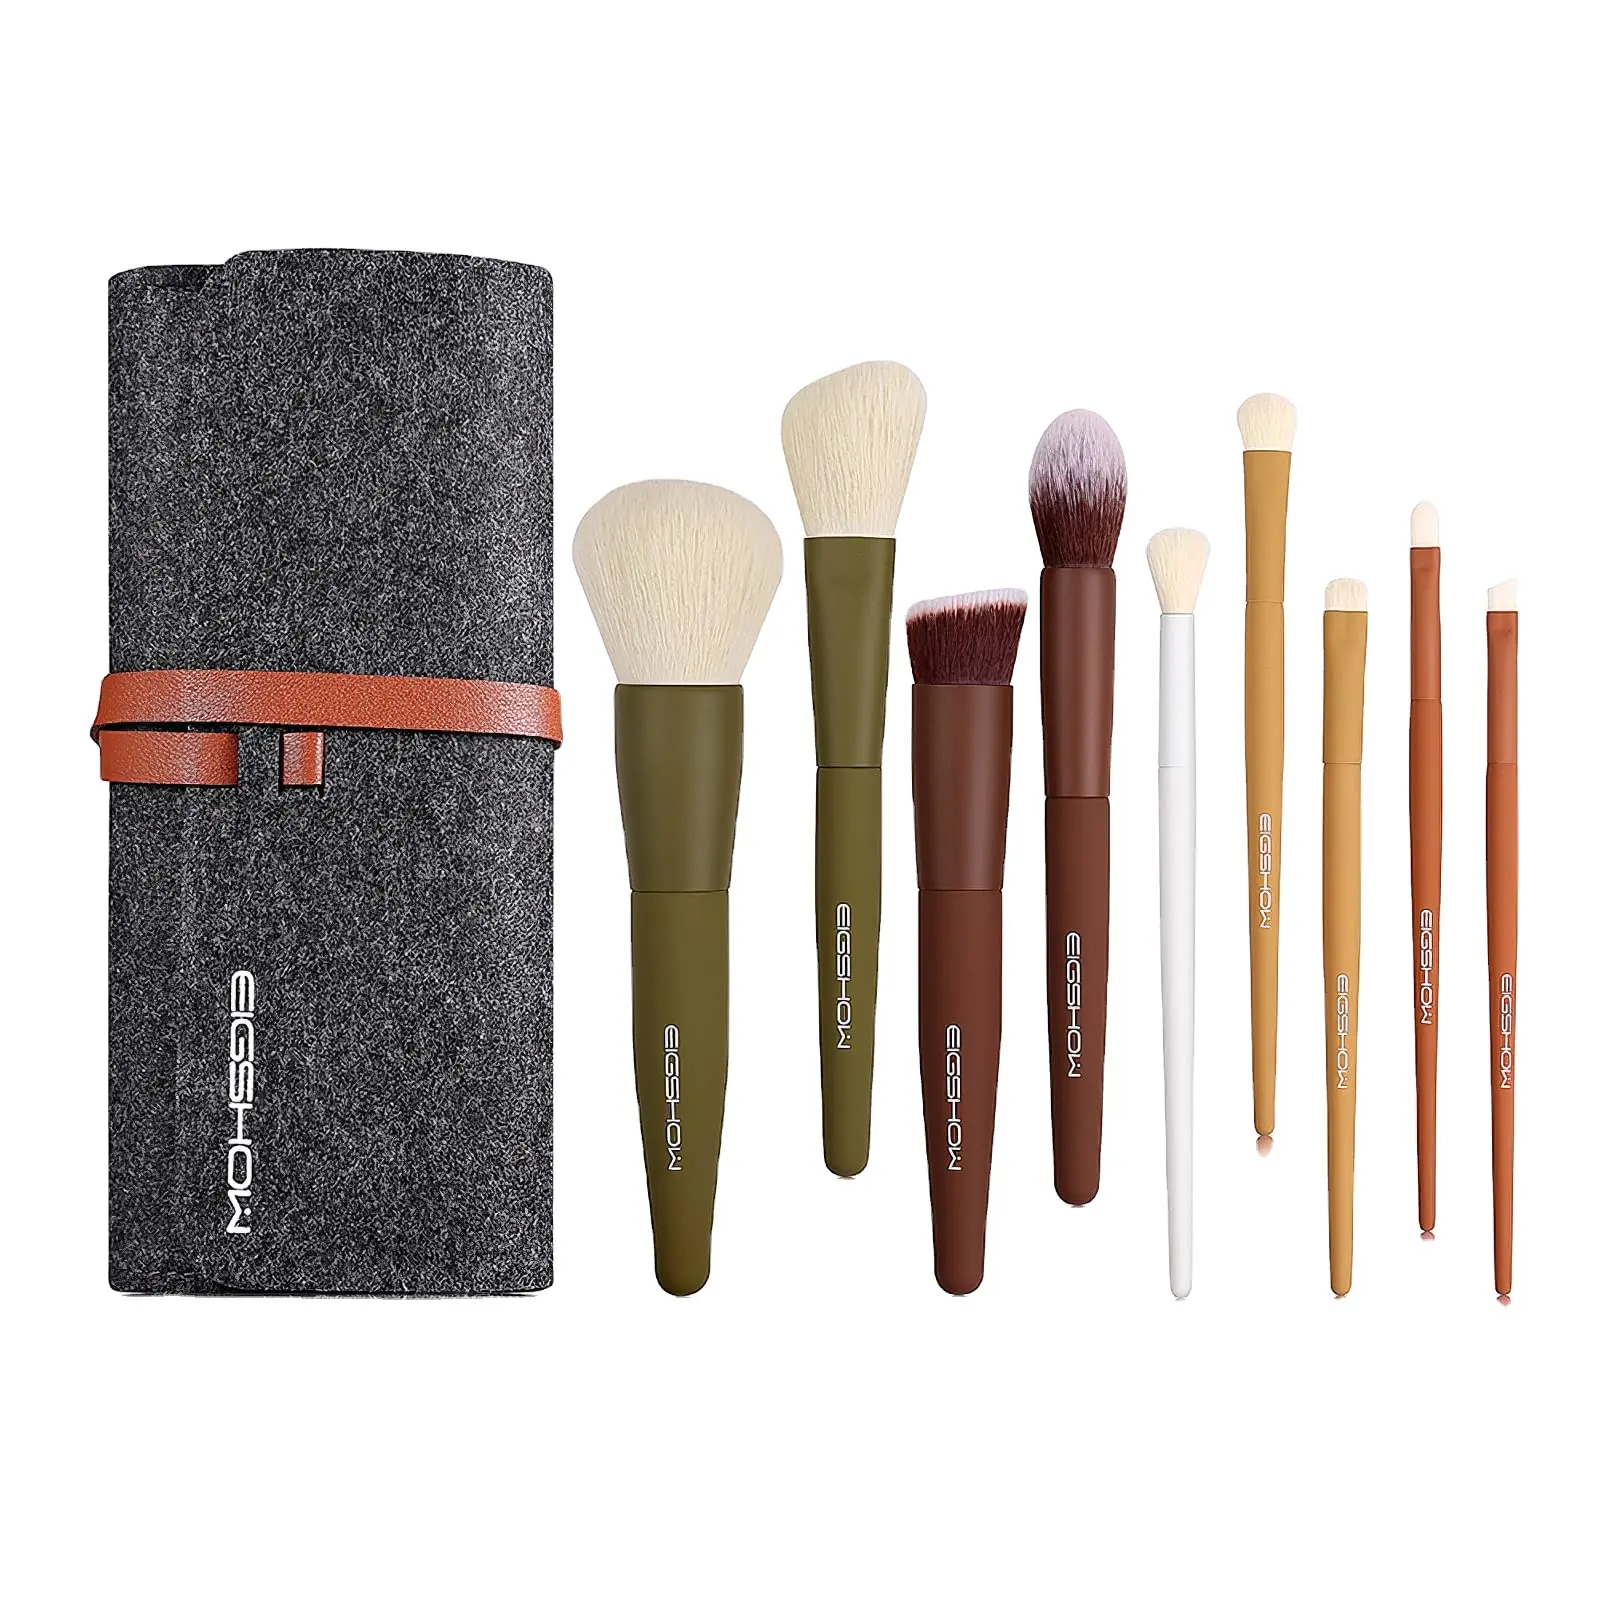 Makeup Brushes 5 Color Essential Kabuki Makeup Brush Set With Extra Soft Synthetic Fibers For Powder Blush